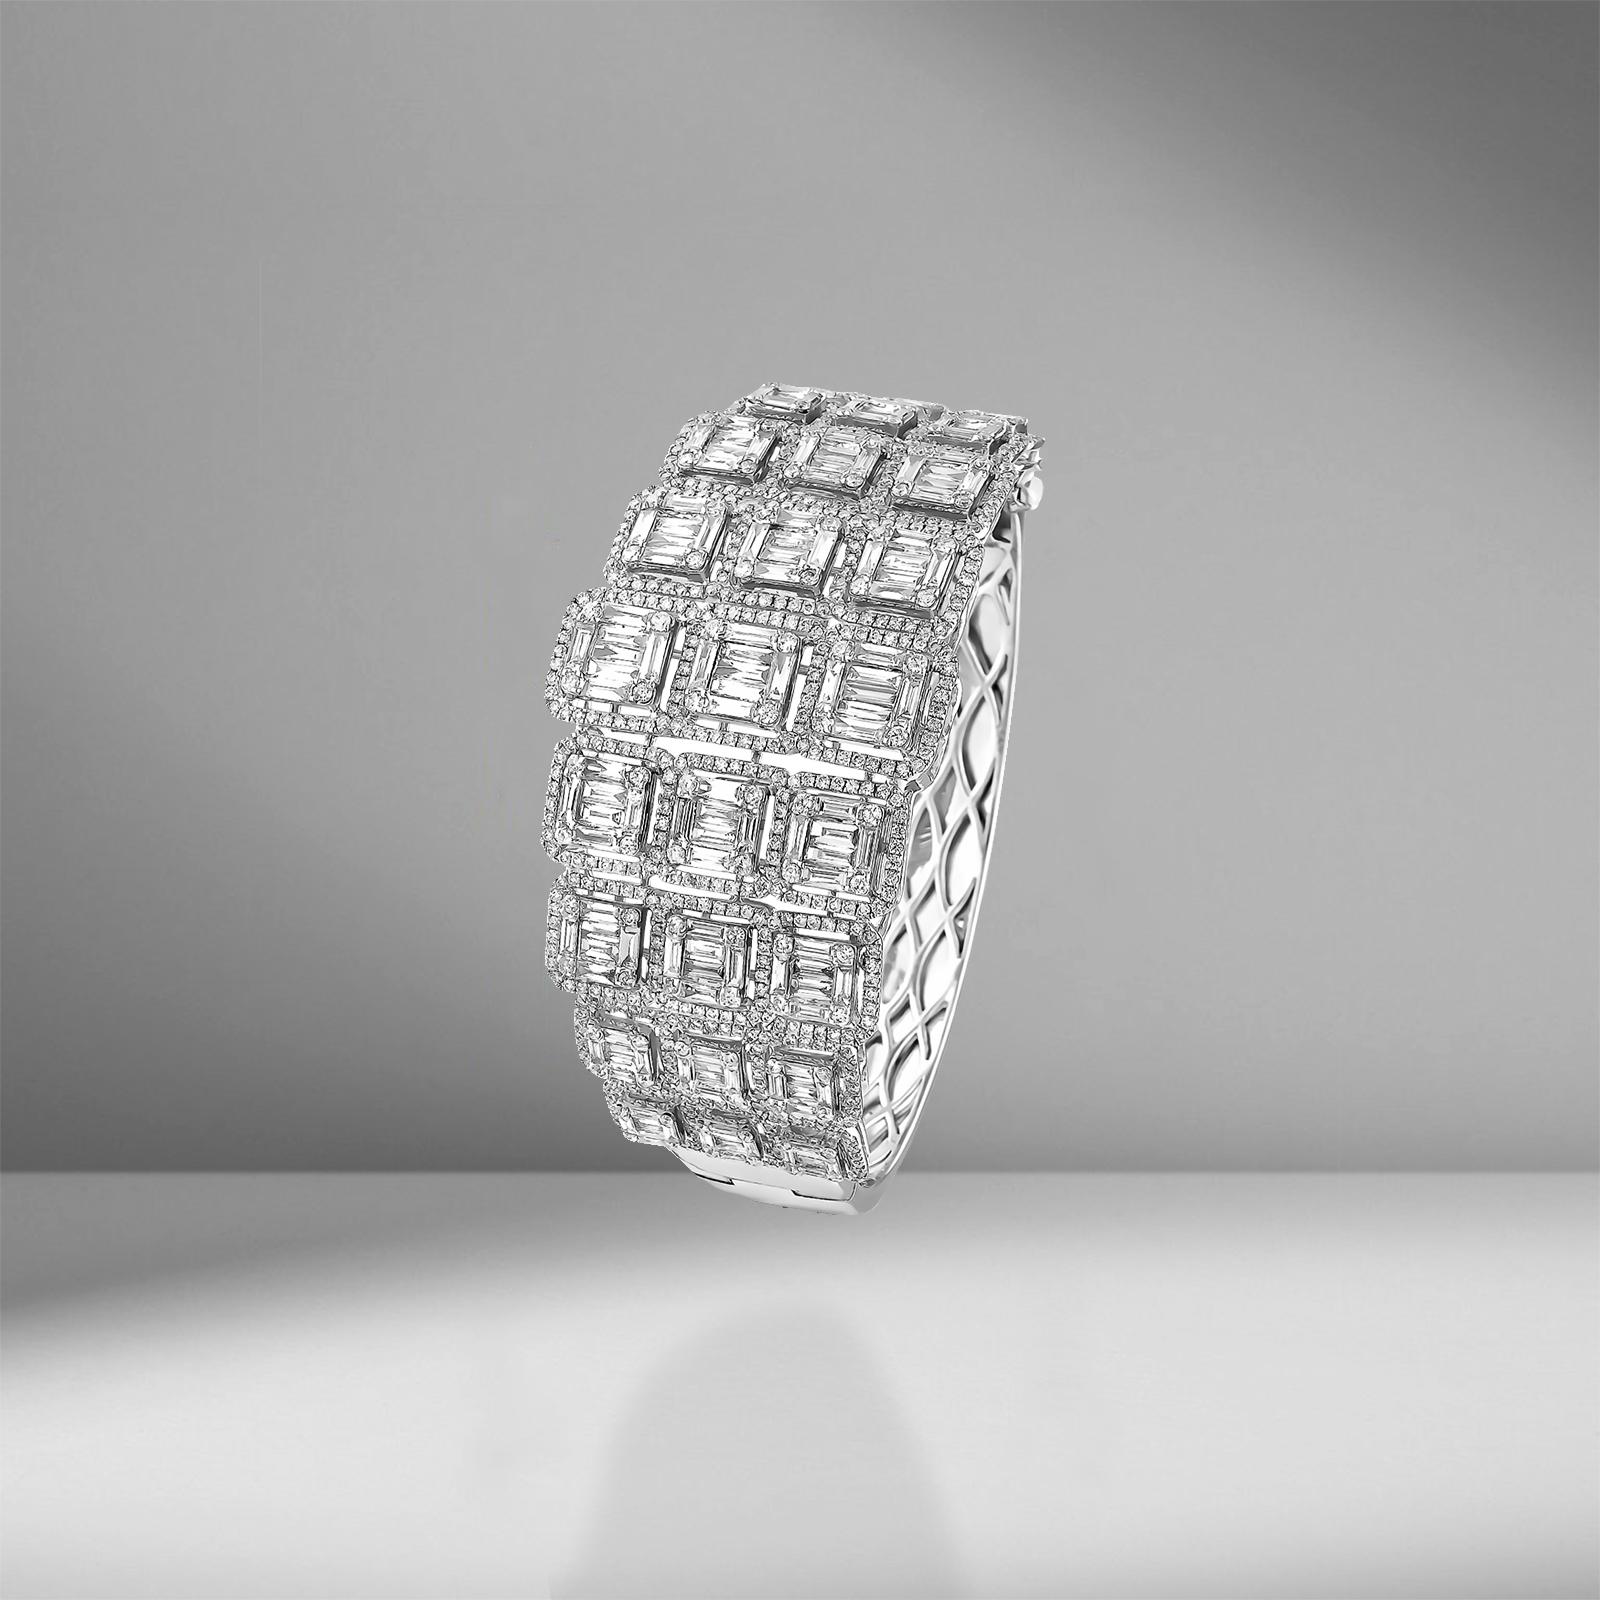 Baguette Diamond Clamper Bracelet Will Add a Luxurious Touch to Your Look. 

The bracelet features 7.04 ctw. of VS Baguette Diamonds. 
18 Karat White Gold Weighs 41.25 grams. 

Have you heard of the baguette-cut diamond? It’s not a diamond-cut you